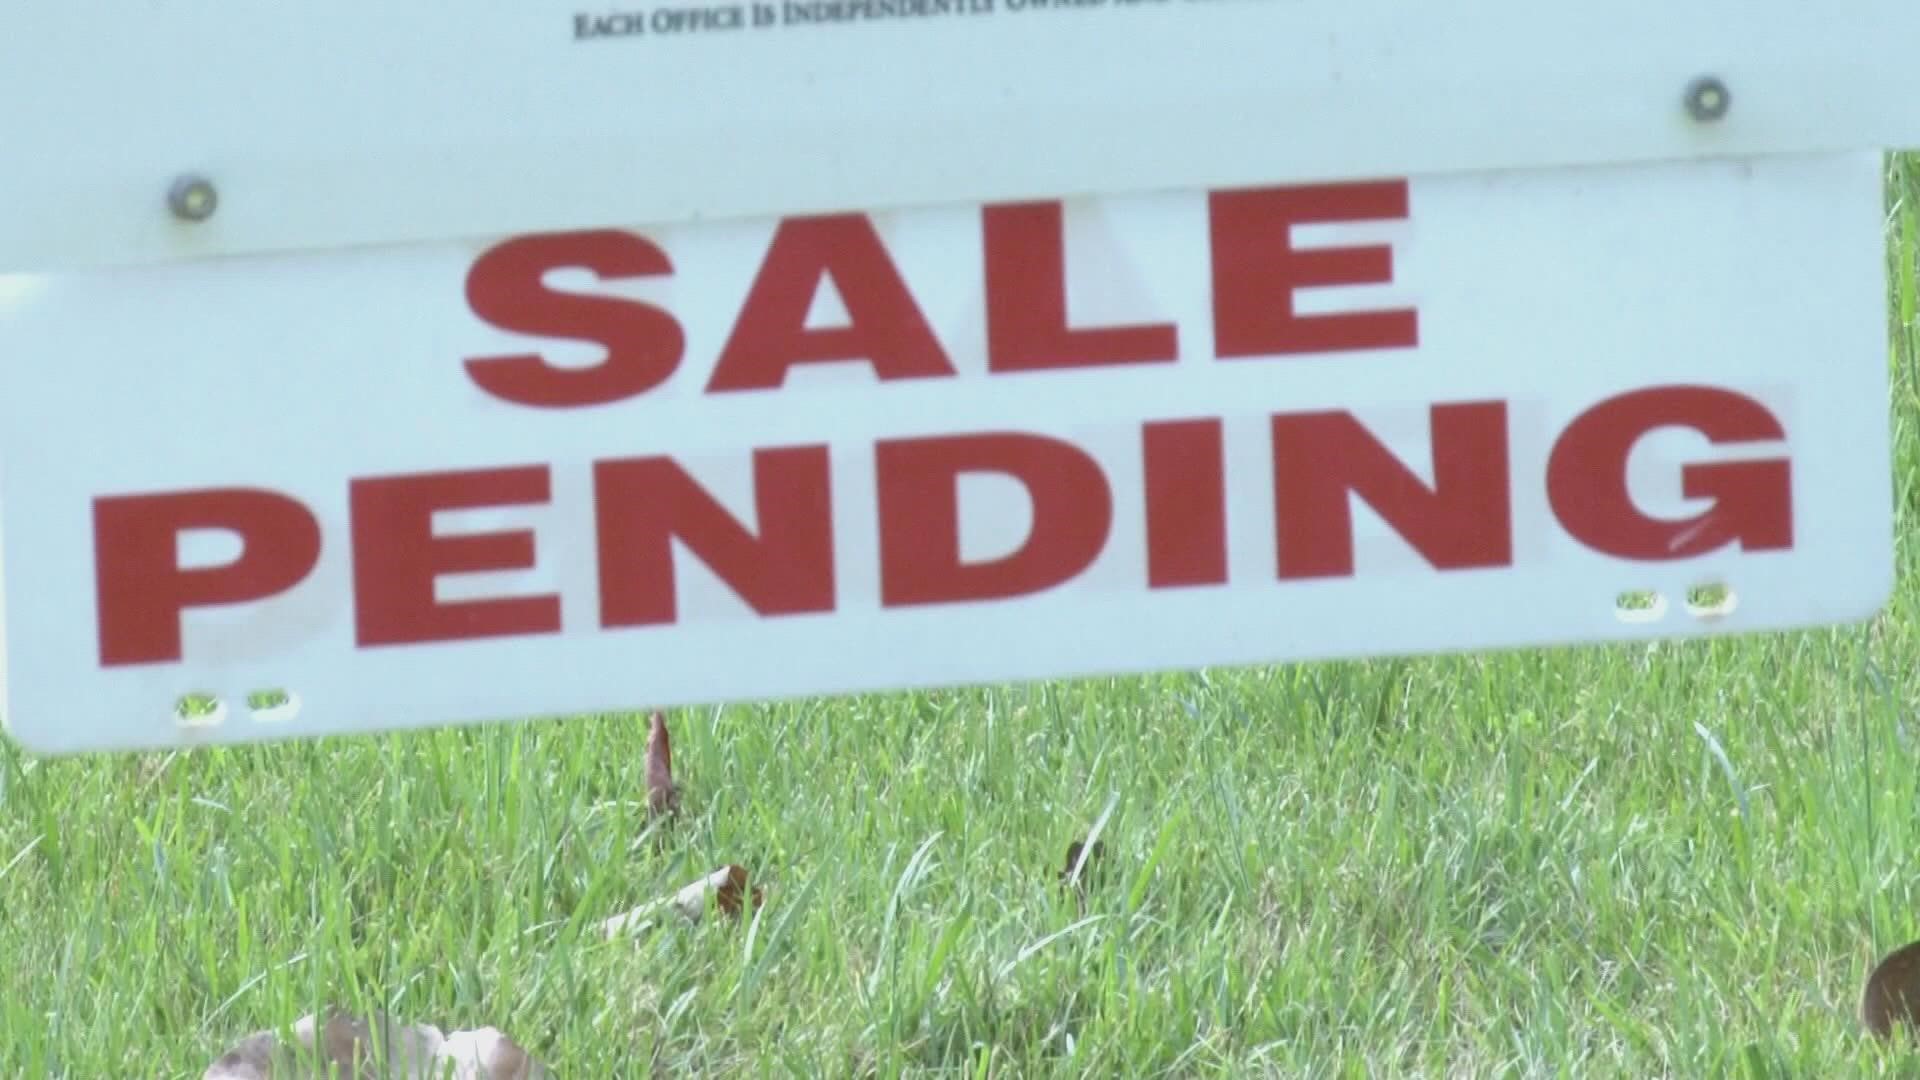 For the past few years, the East TN housing market has been booming with cash buyers from big cities like LA, Chicago and New York.